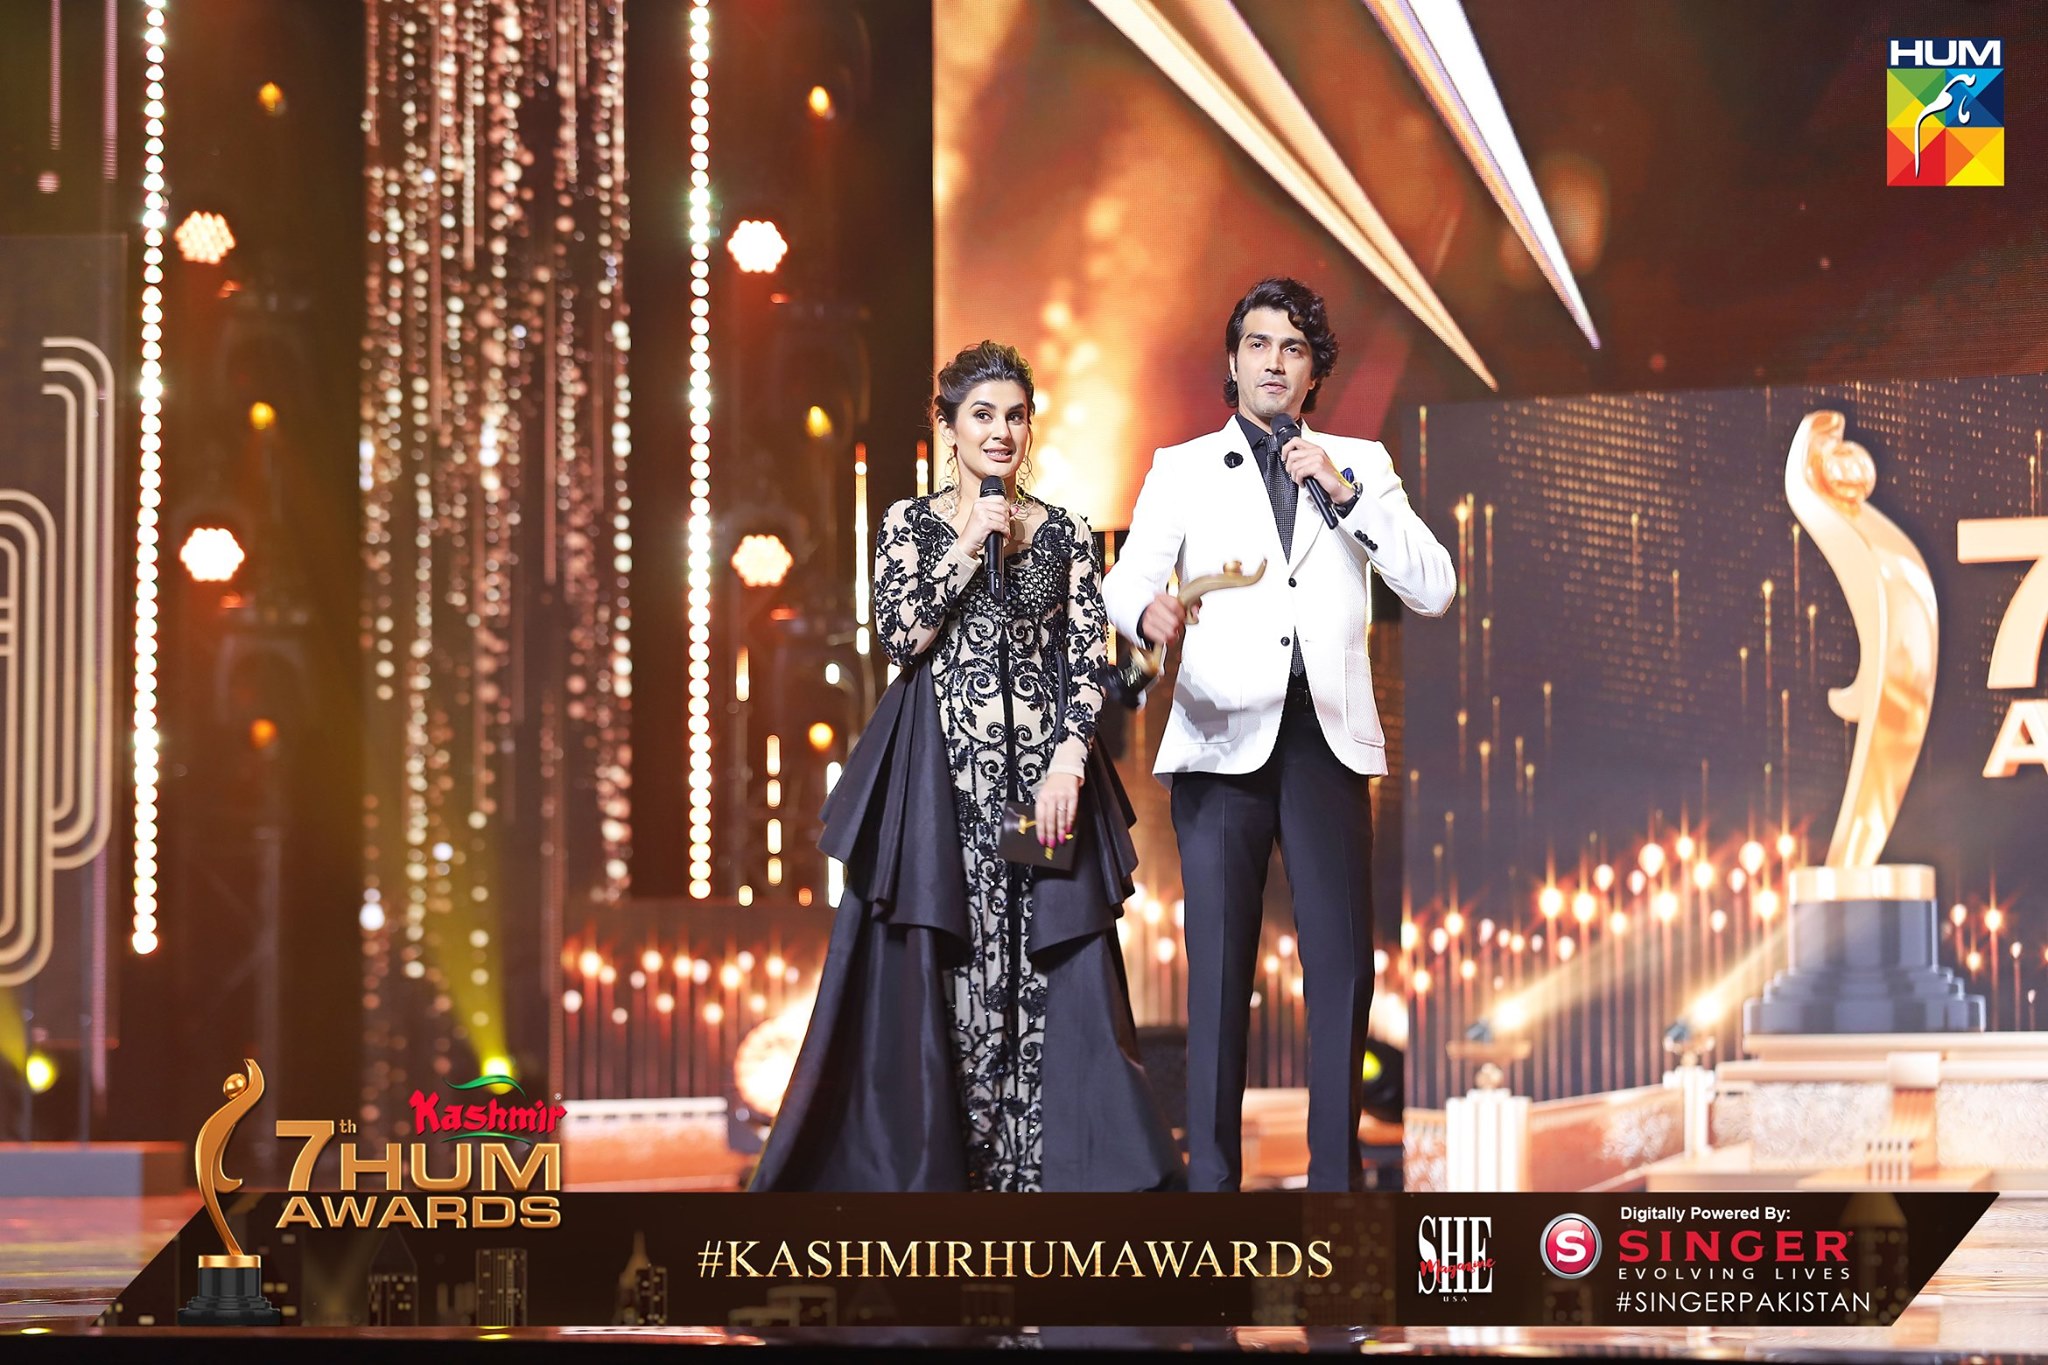 Beautiful Pictures from Hum Awards 2019